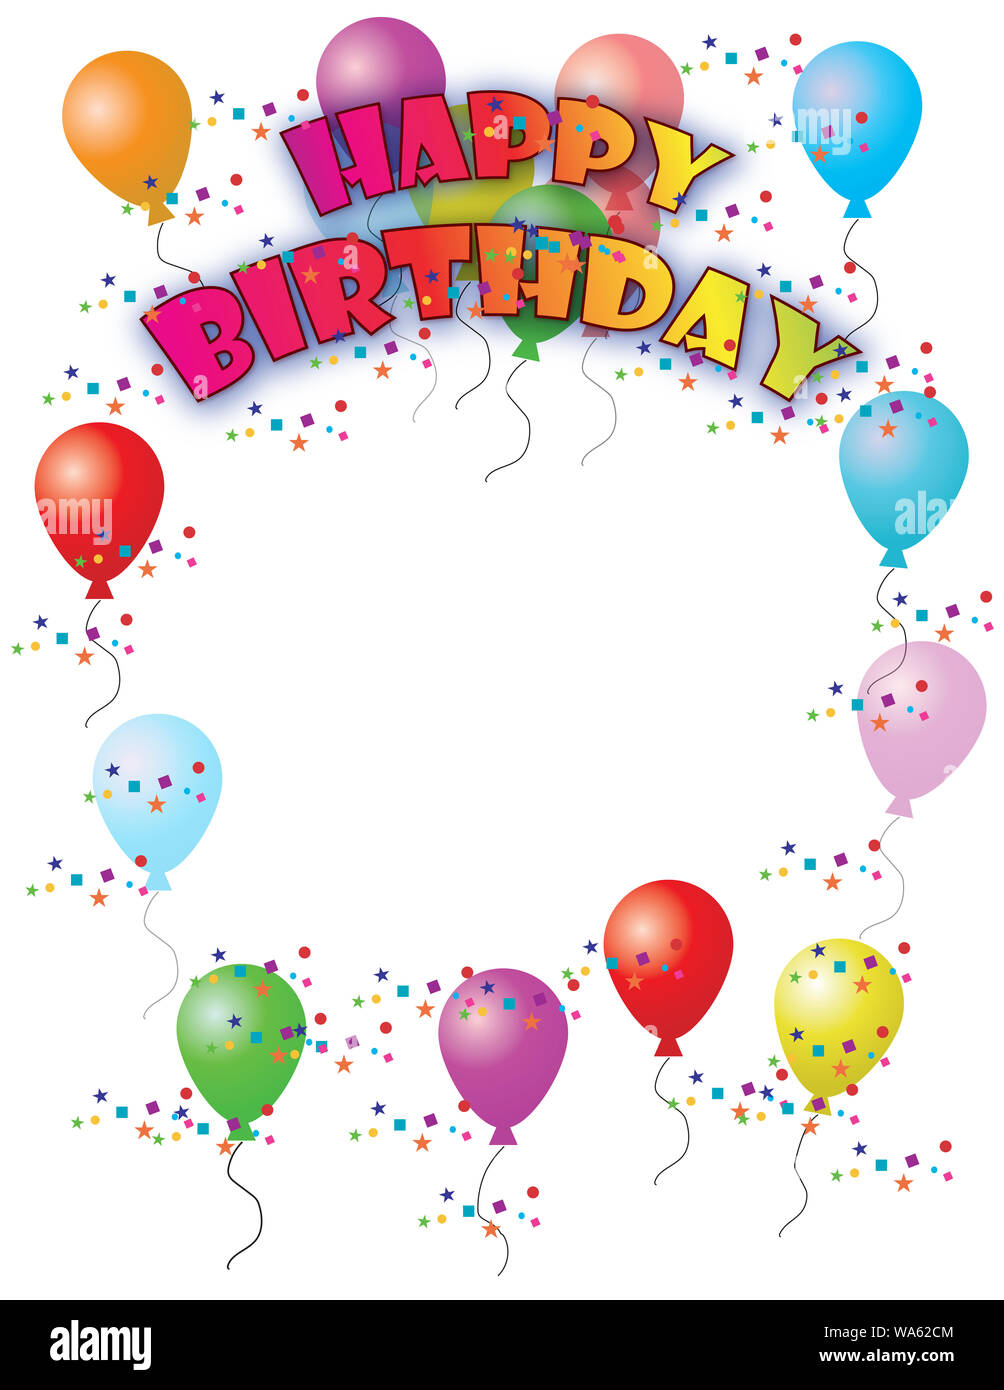 Happy birthday border with colorful balloons and type, copy space Stock ...